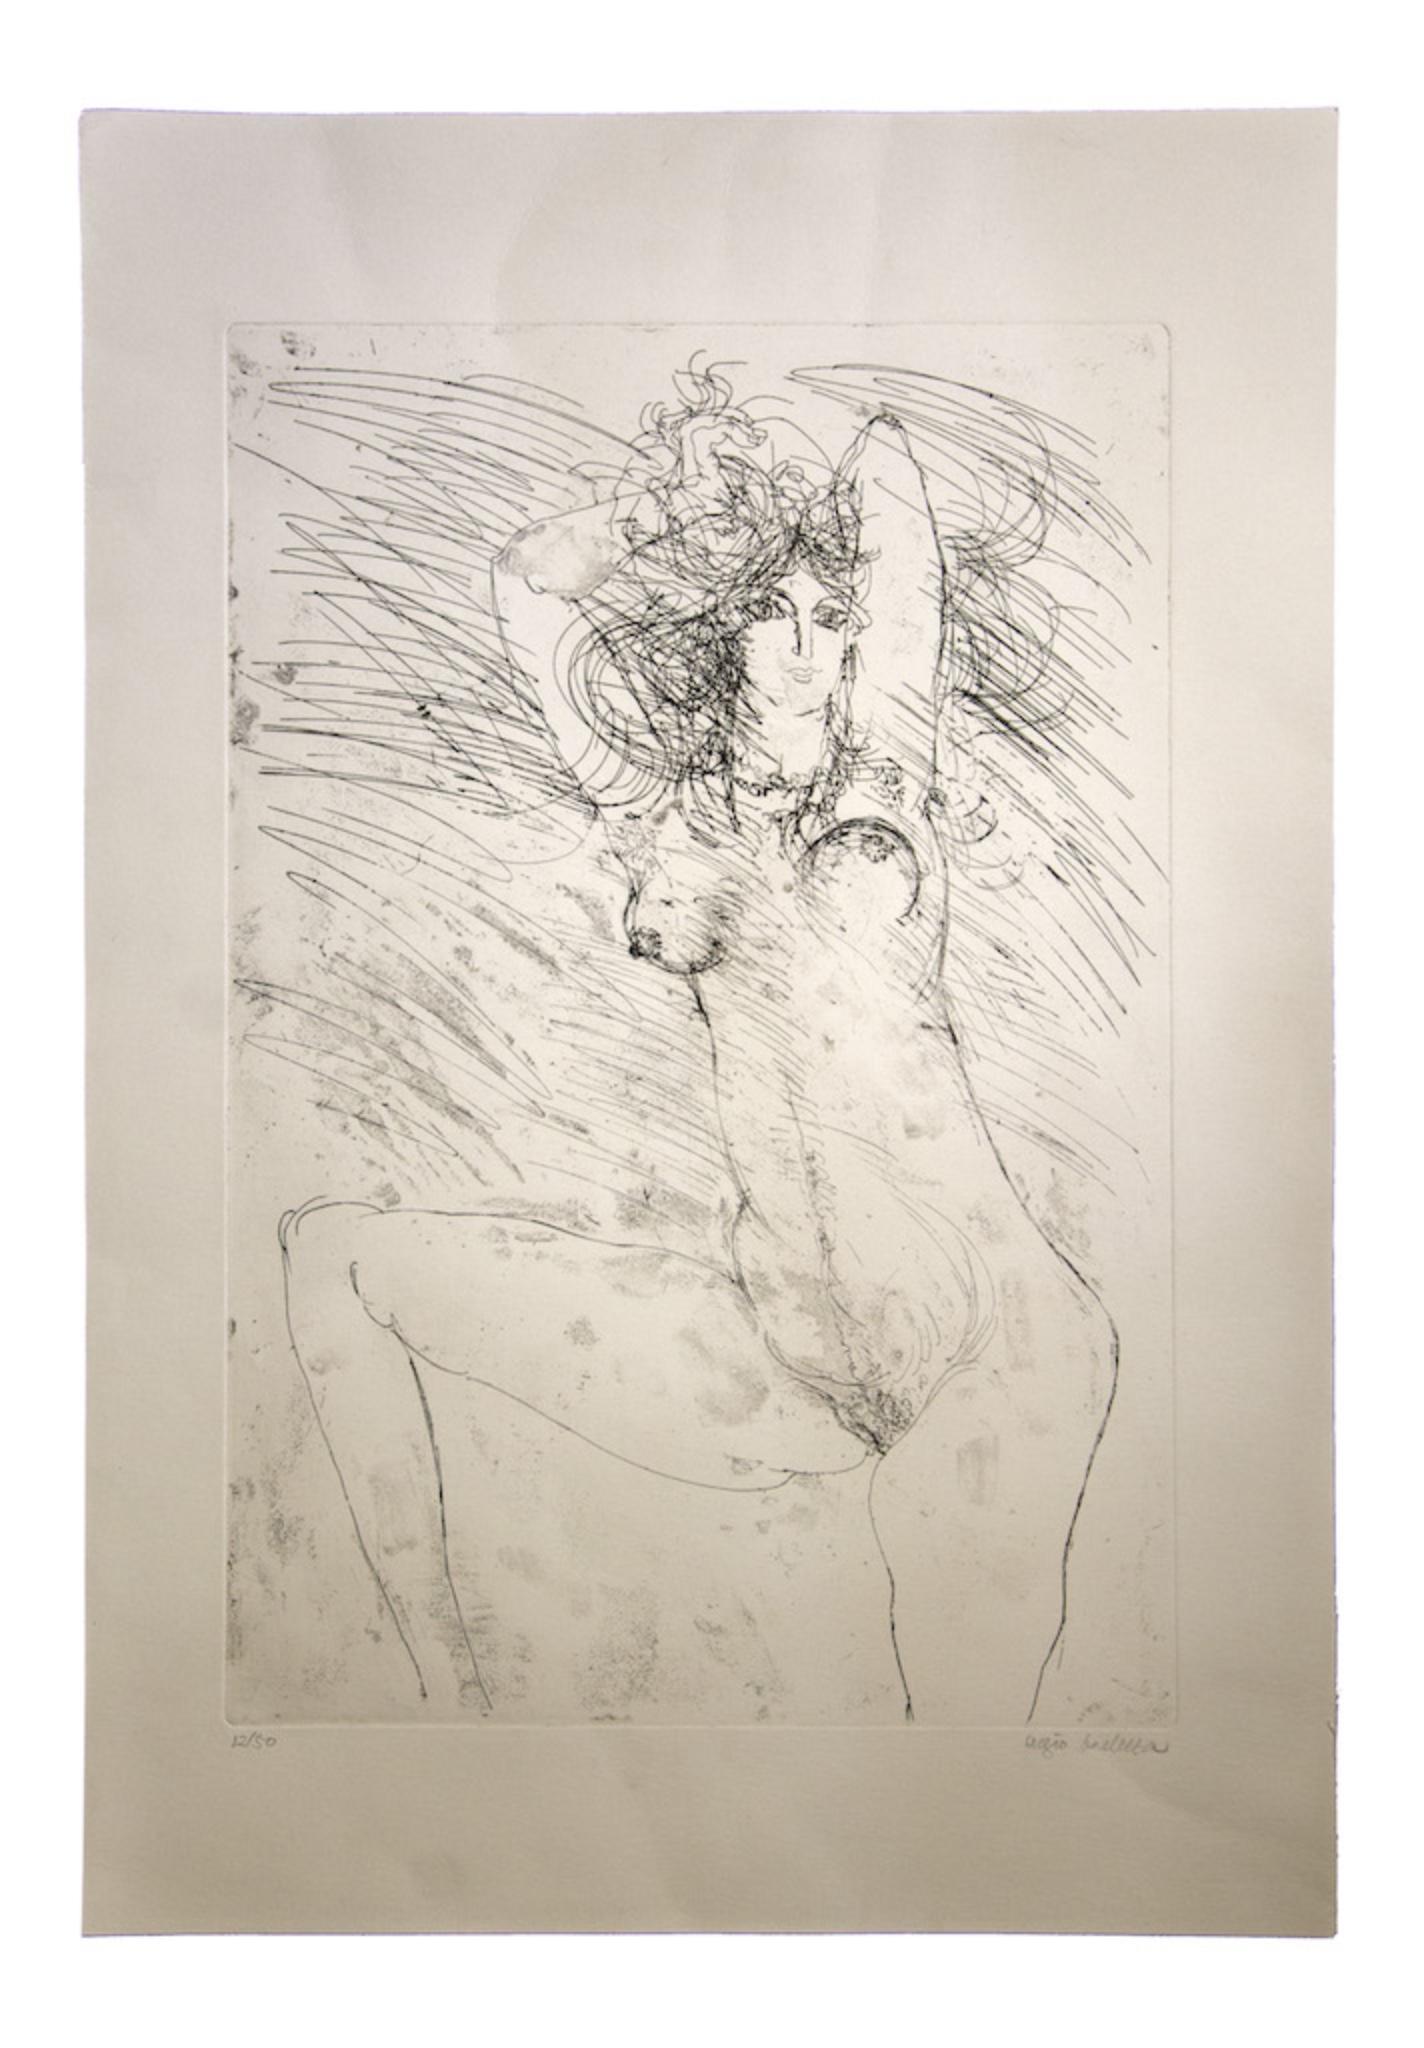 Nude is an original etching realized by Sergio Barletta in 1980. 

Hand-signed on the lower right in pencil. Numbered, edition of 12/50 prints, on the lower left in pencil.

In very good conditions, except for some folding. 

The artwork represents